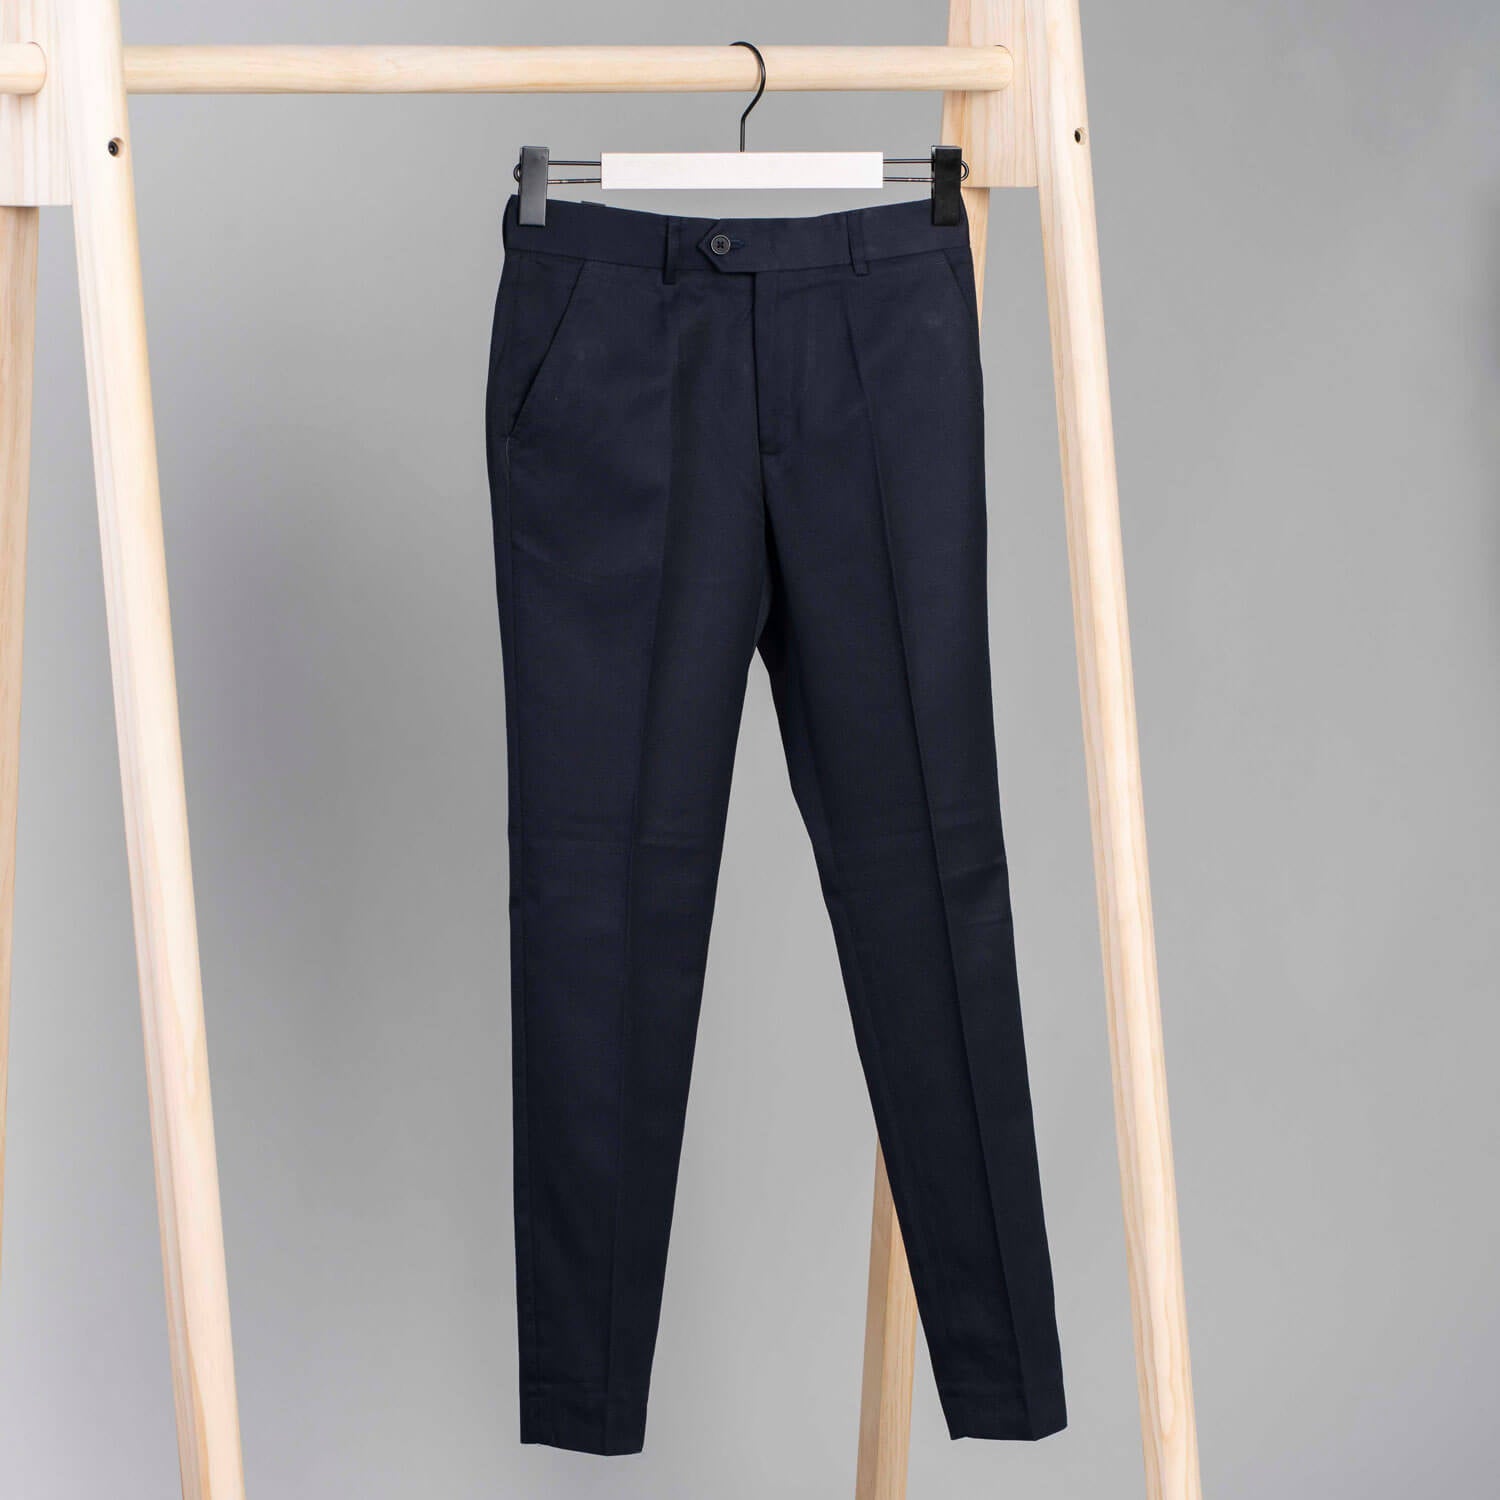 Blue Dot Lewis Youth Boys Trousers - Navy 1 Shaws Department Stores